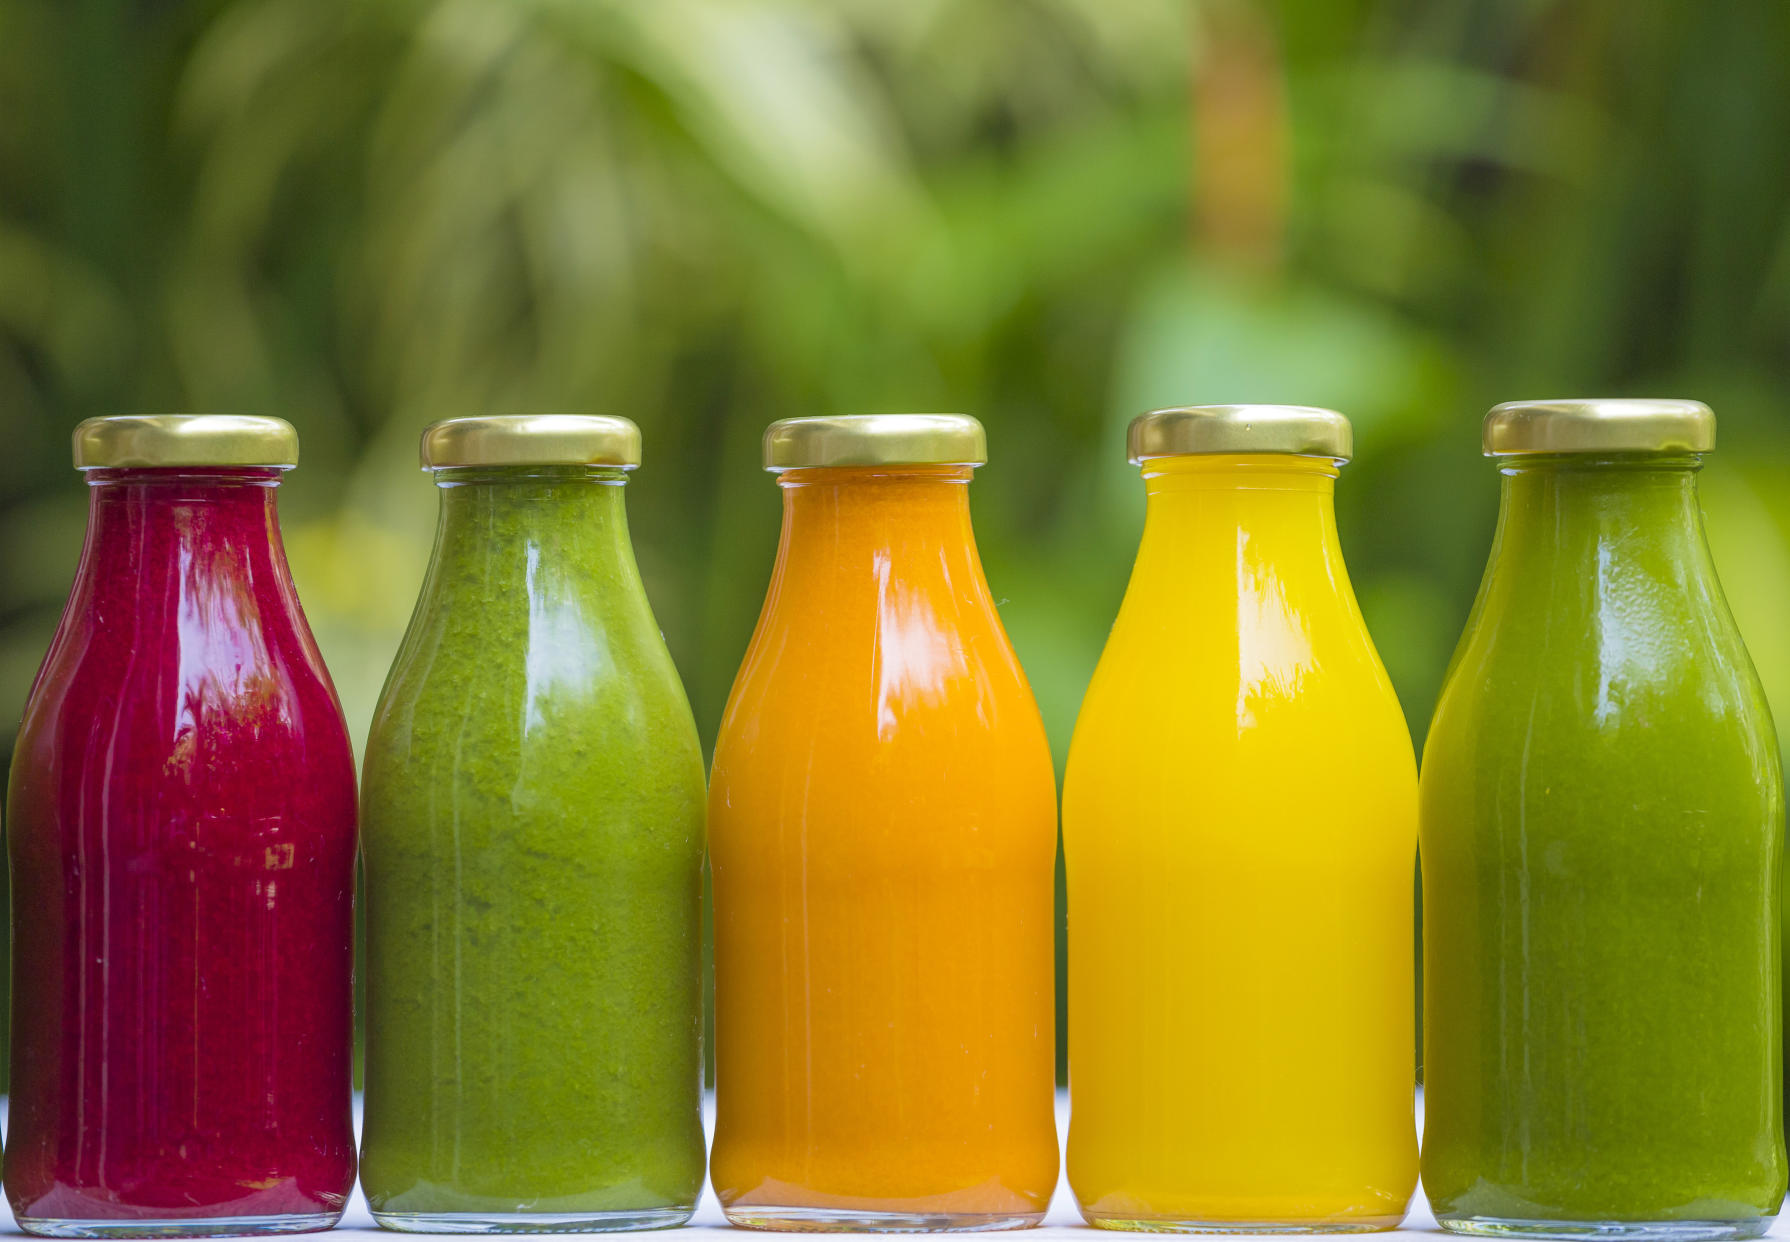 Organic cold-pressed raw vegetable juices in glass bottles. Raw fruits can cause food poisoning. 